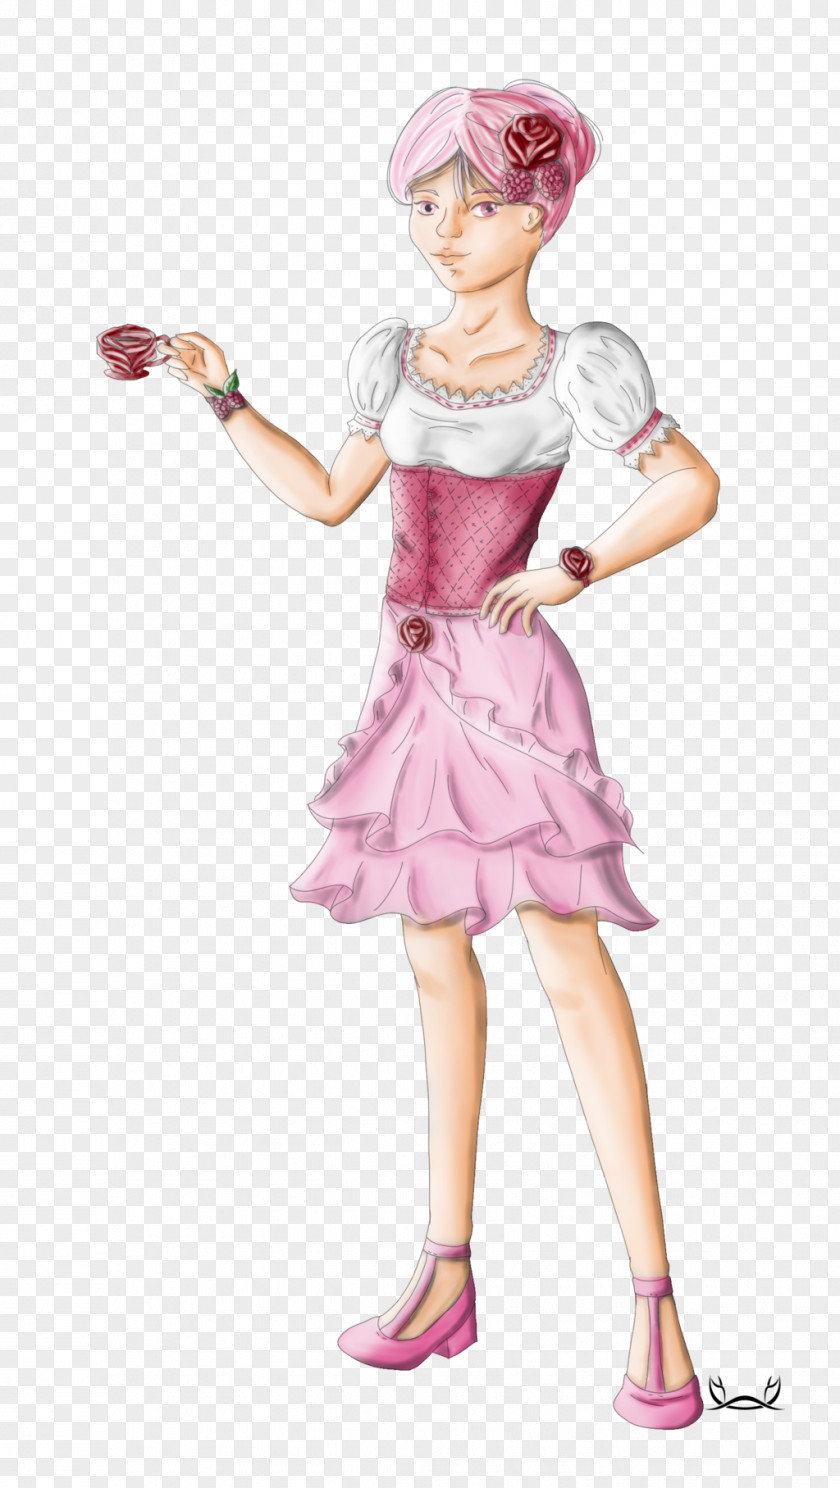 Lychee Tea Costume Design Character Fiction PNG